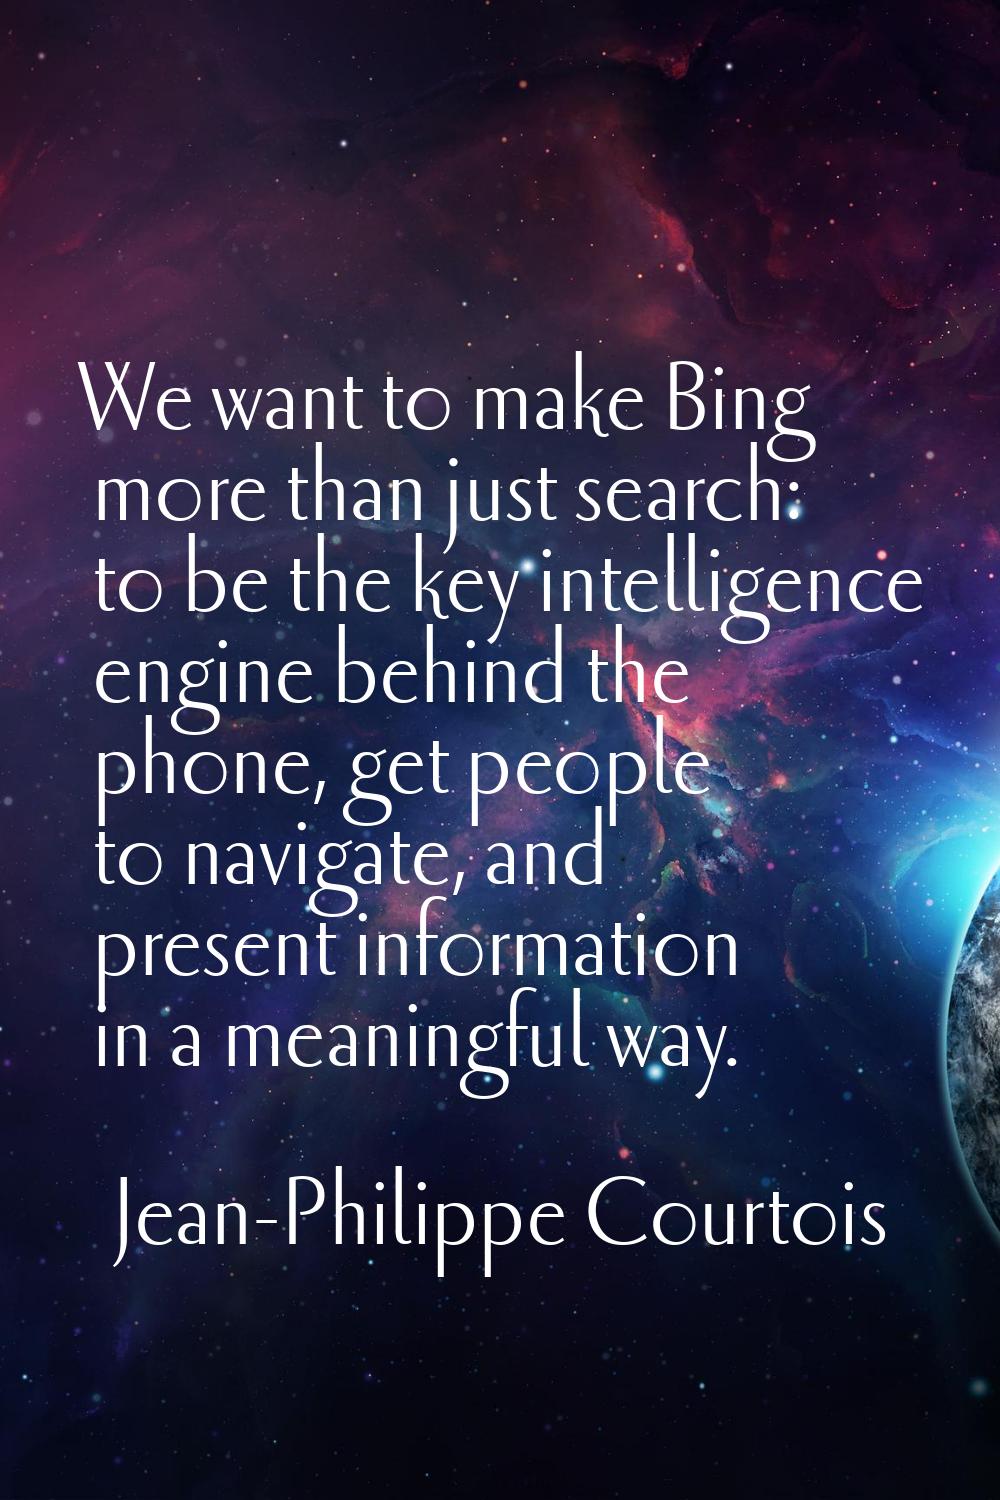 We want to make Bing more than just search: to be the key intelligence engine behind the phone, get